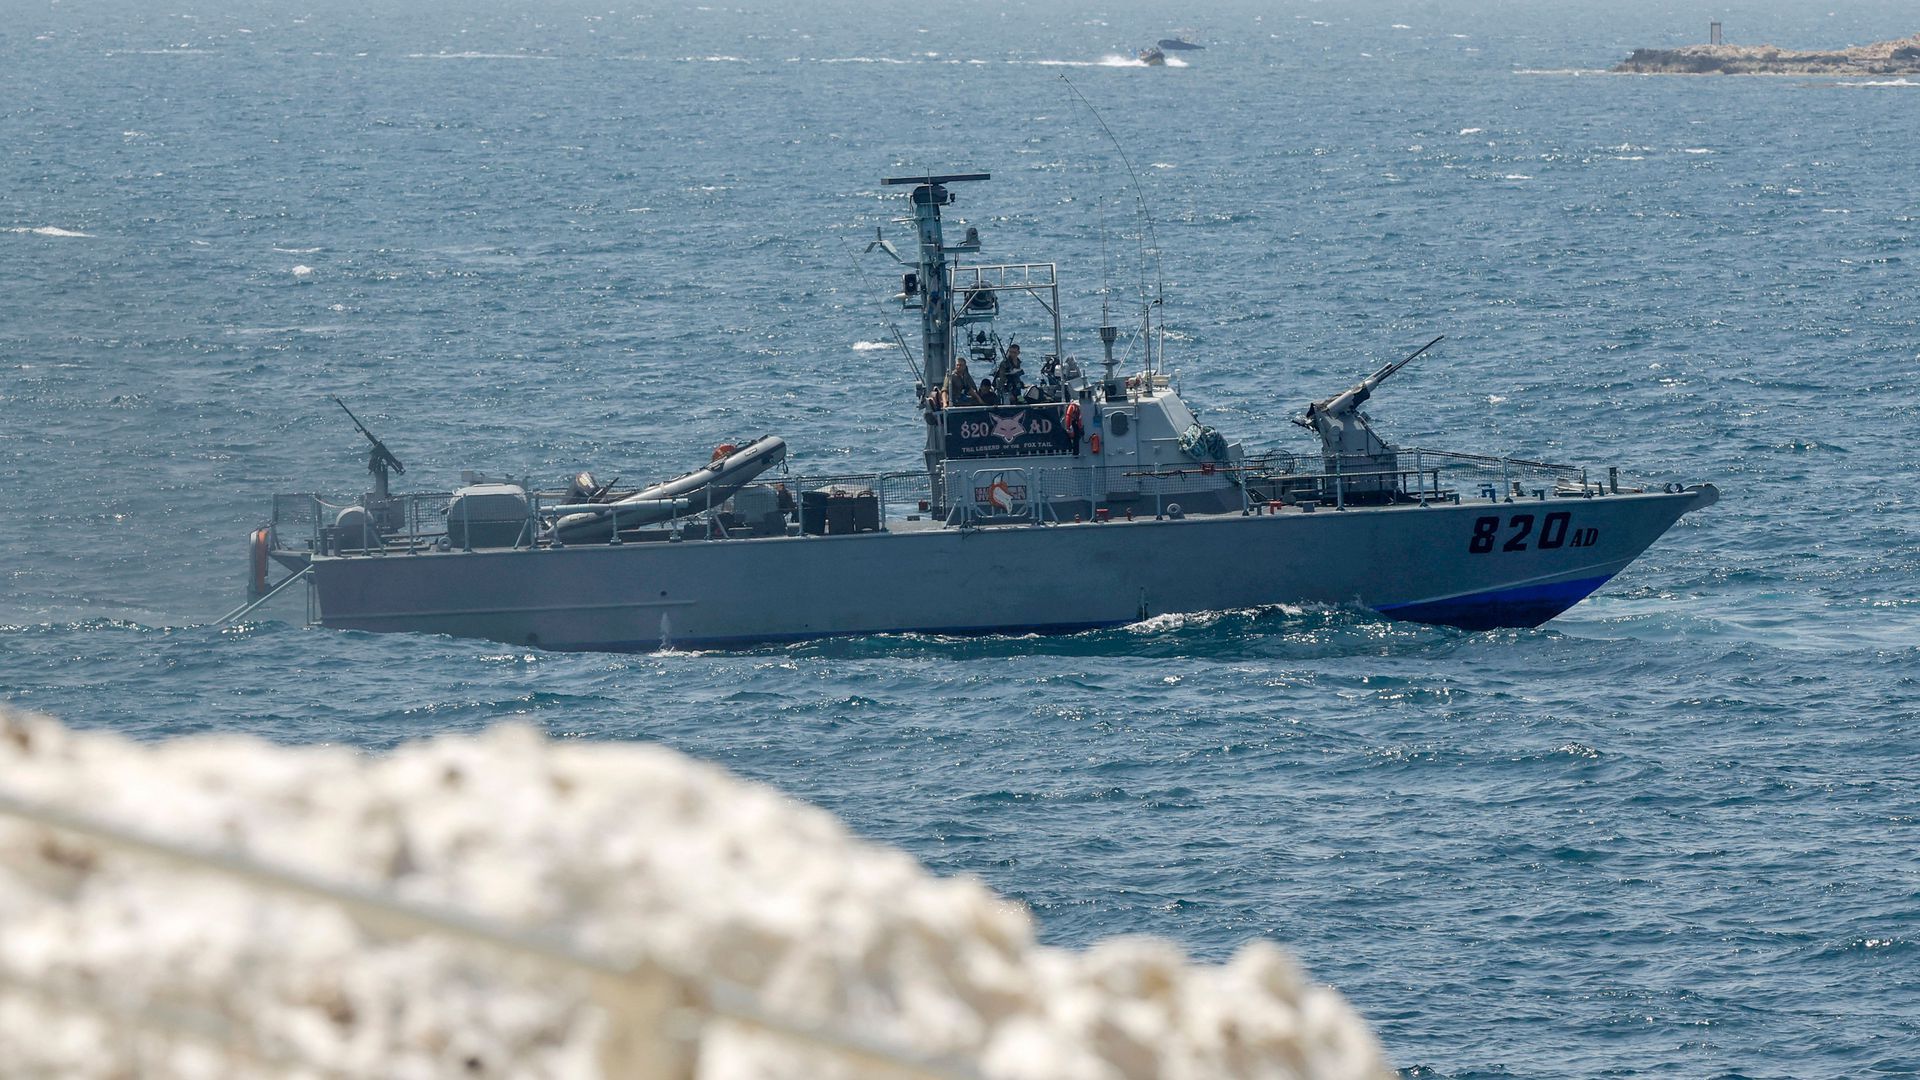 Israeli navy vessels patrol in the Mediterranean waters off the coast of an area along the Israel-Lebanon border in May 2021. Photo: Jack Guez/AFP via Getting Images